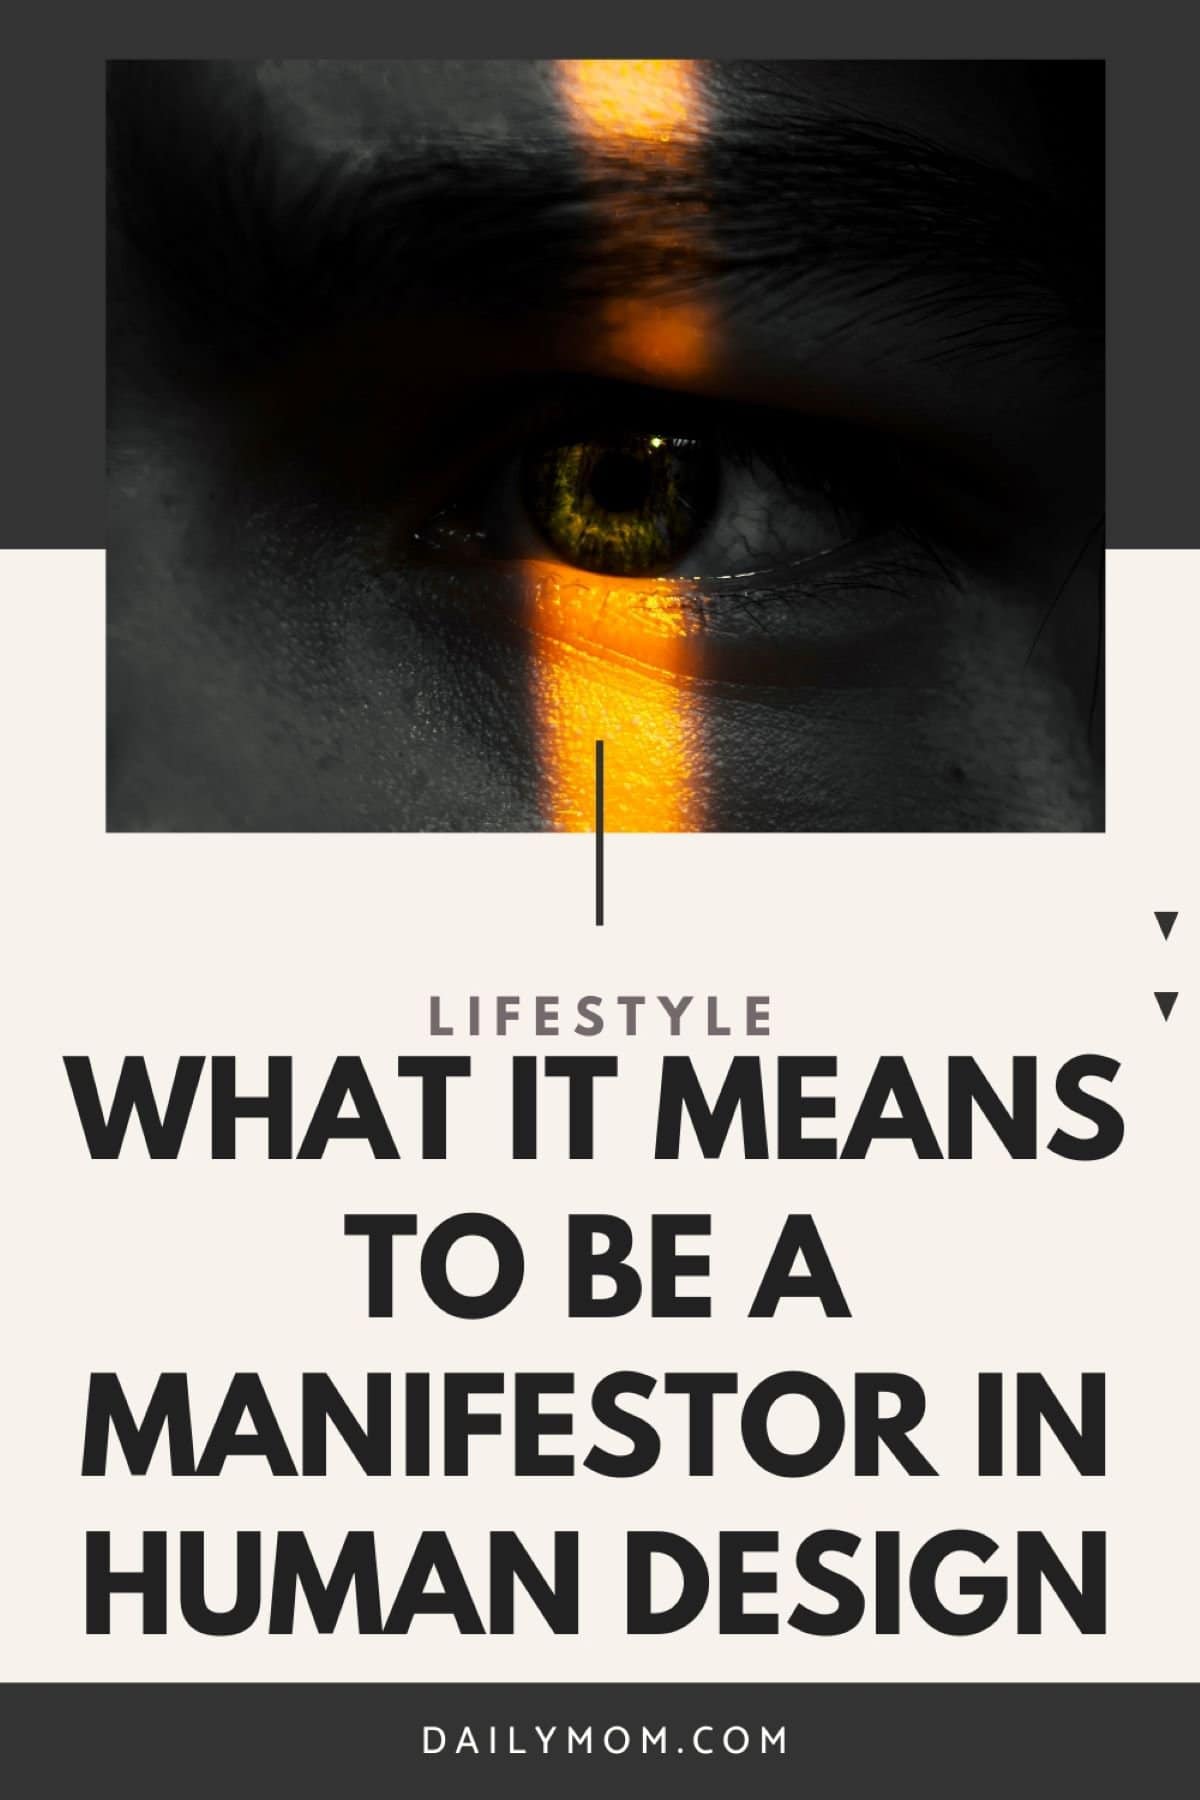 Human Design Manifestor: What it Means to Be a Manifestor Type - Life & Strategy  5 Daily Mom, Magazine for Families